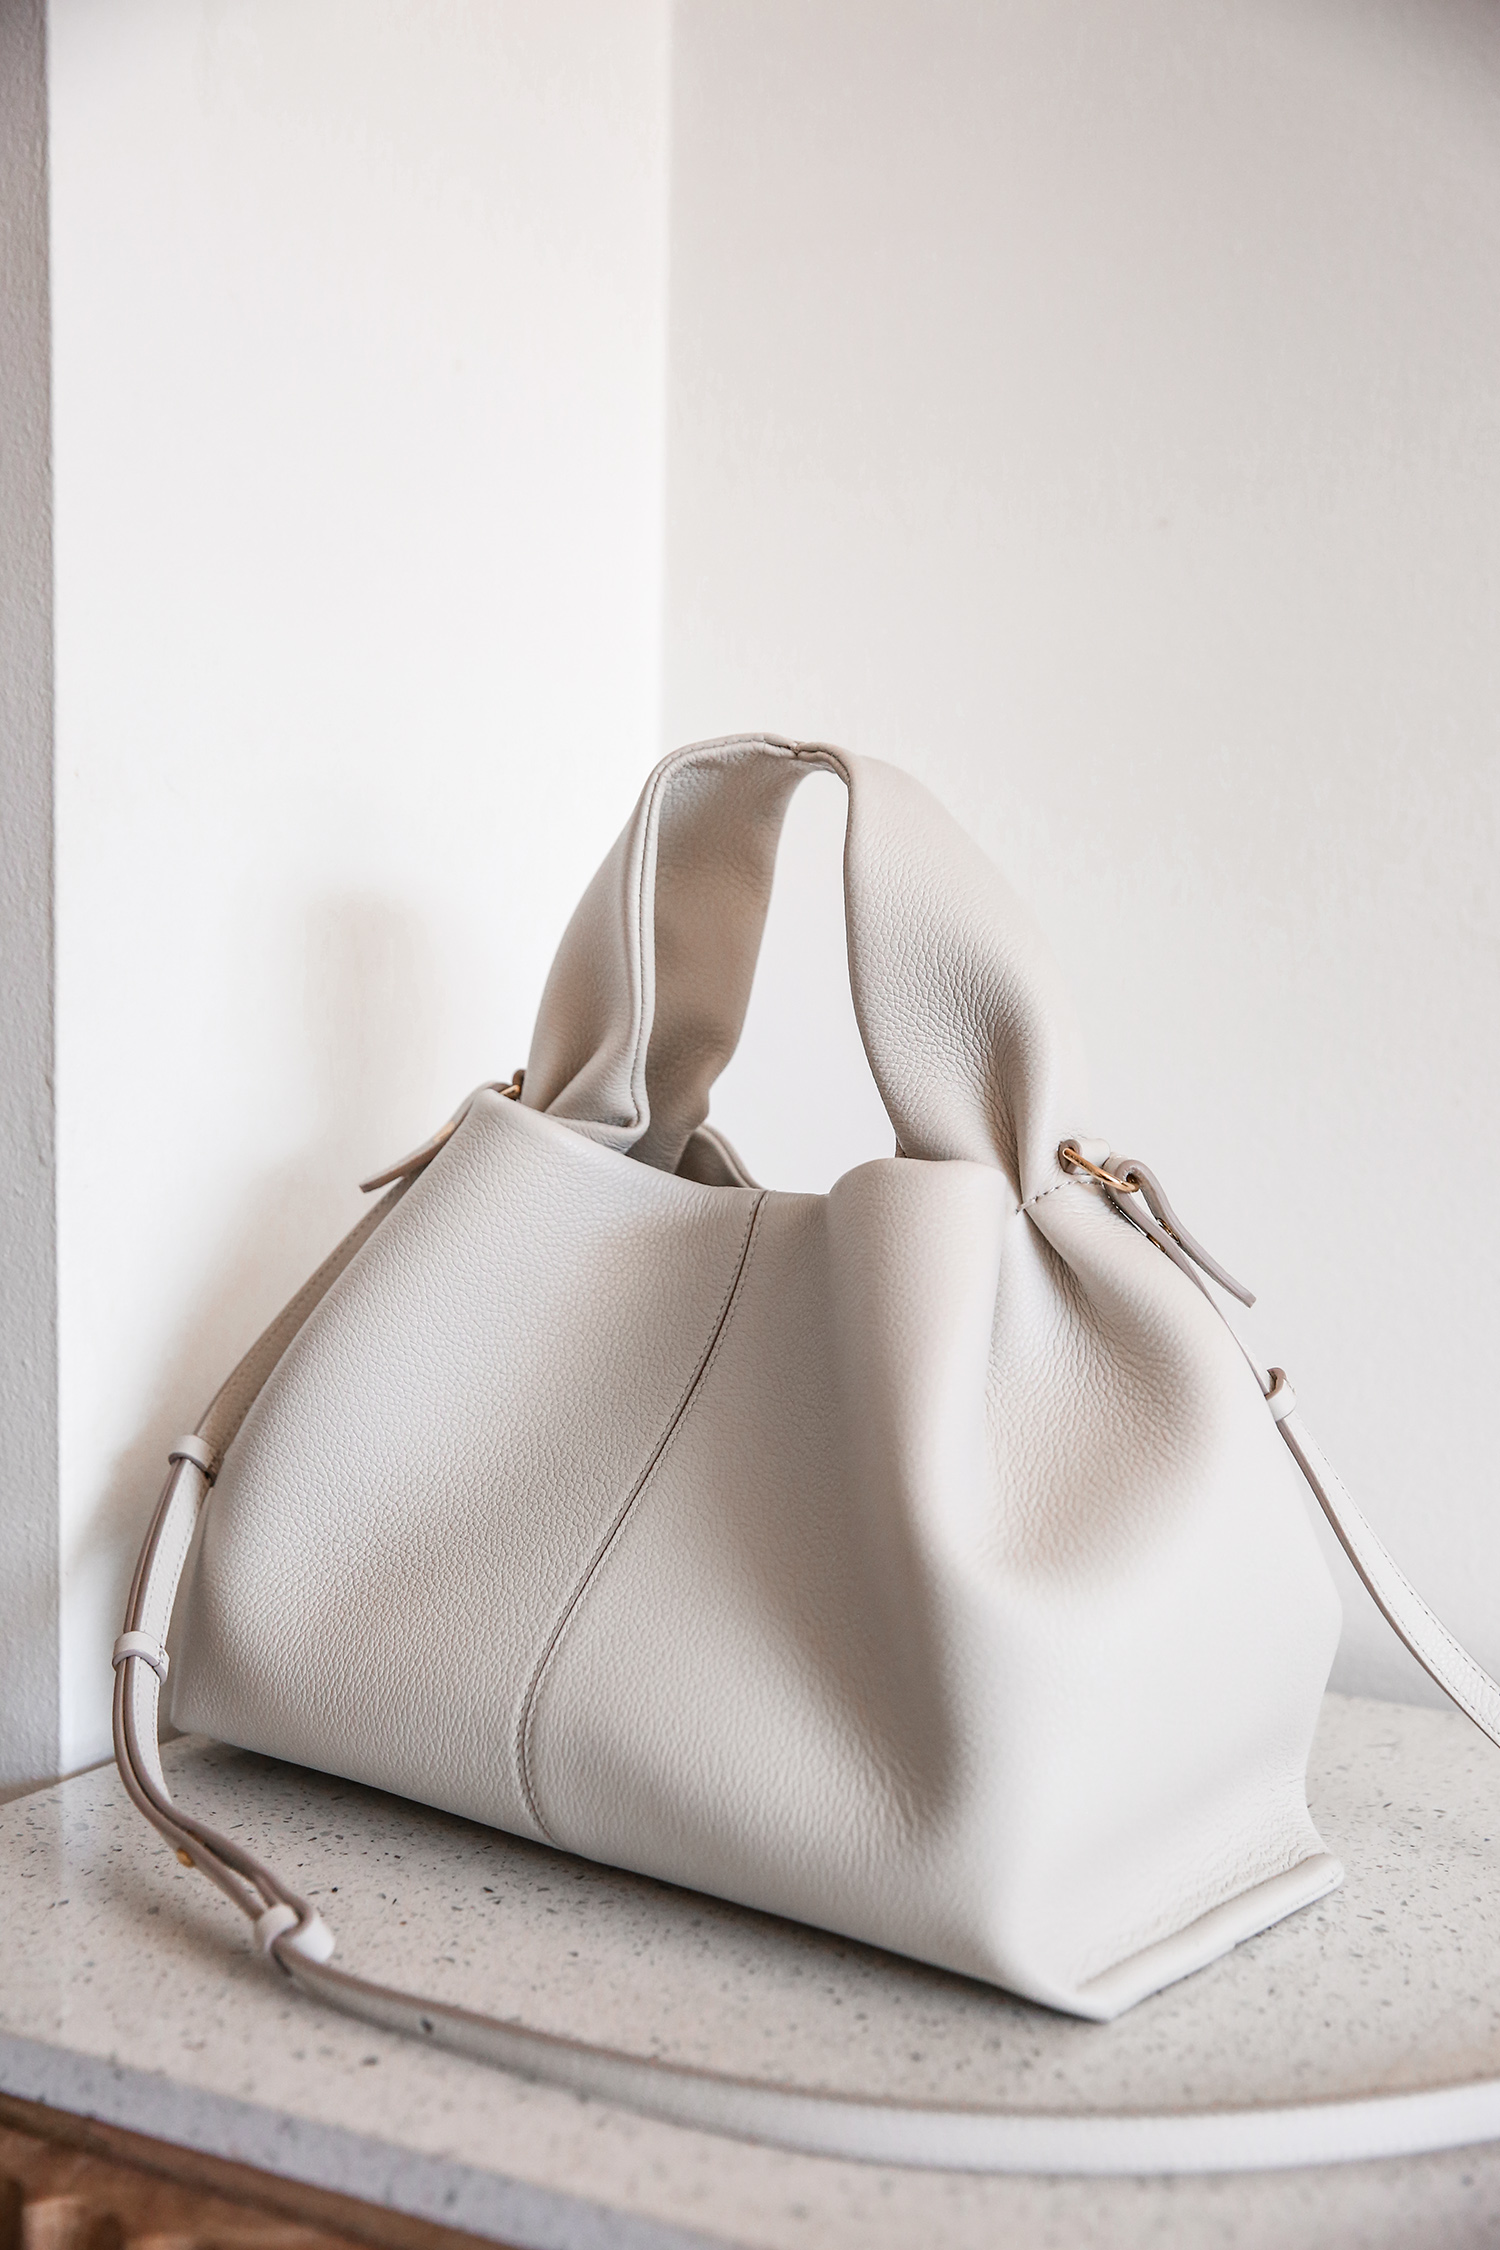 Polene Numero Neuf VS Numero Neuf Mini - Side by side bag comparison & what  fits in each bag 